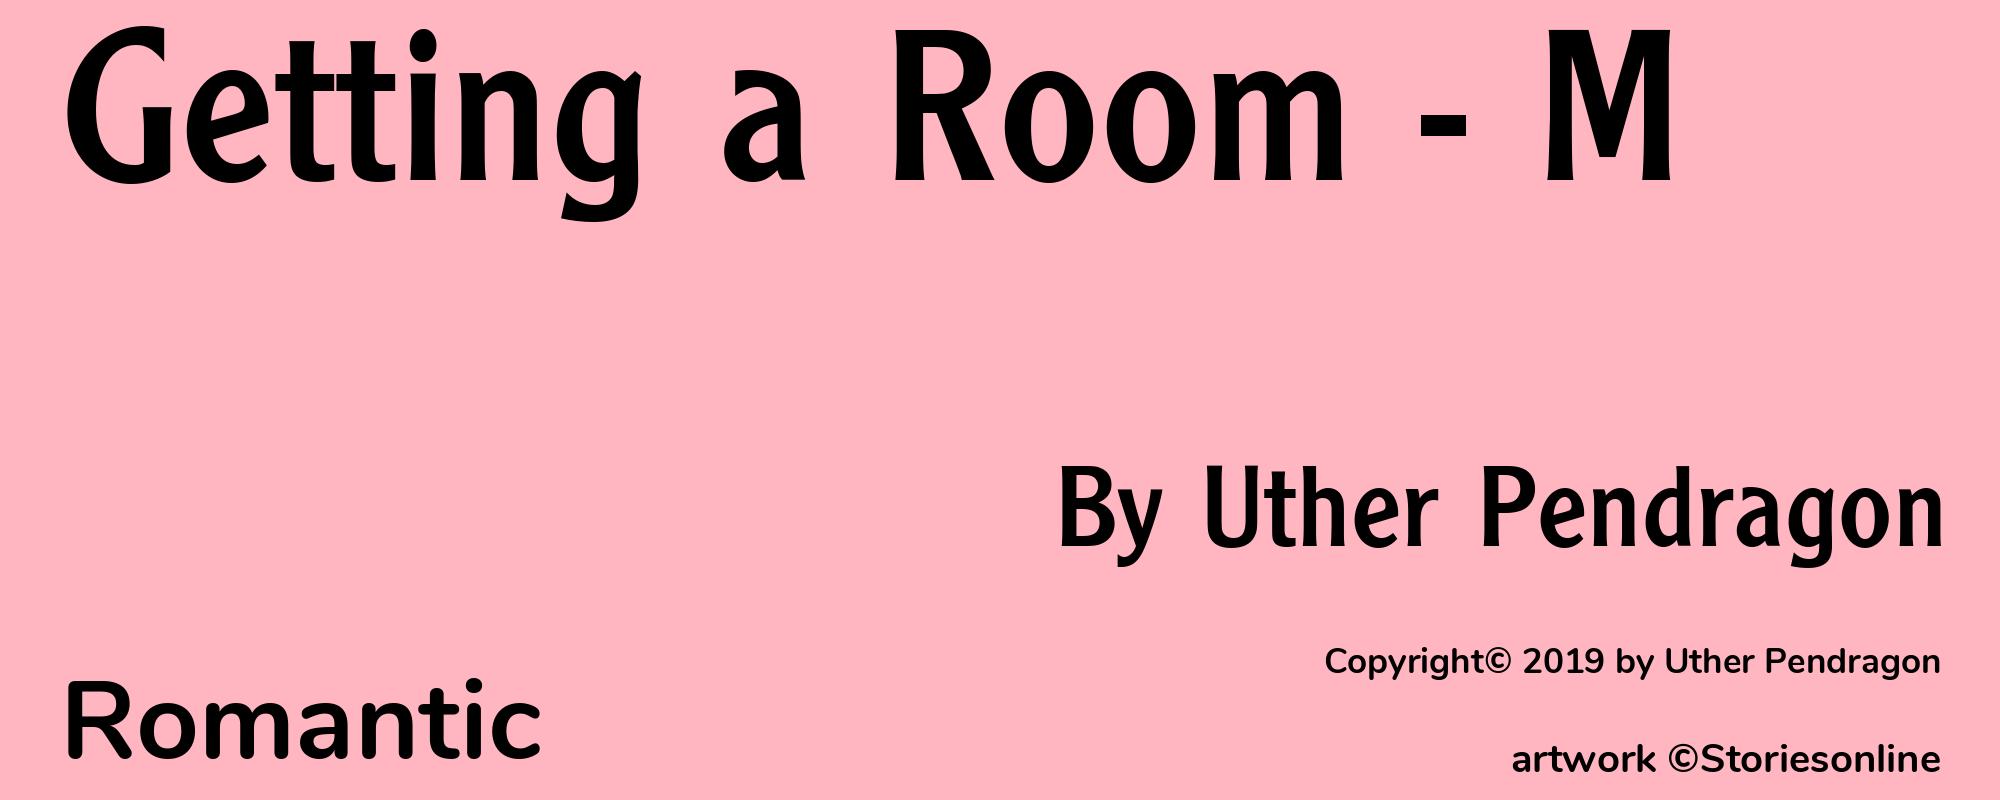 Getting a Room - M - Cover